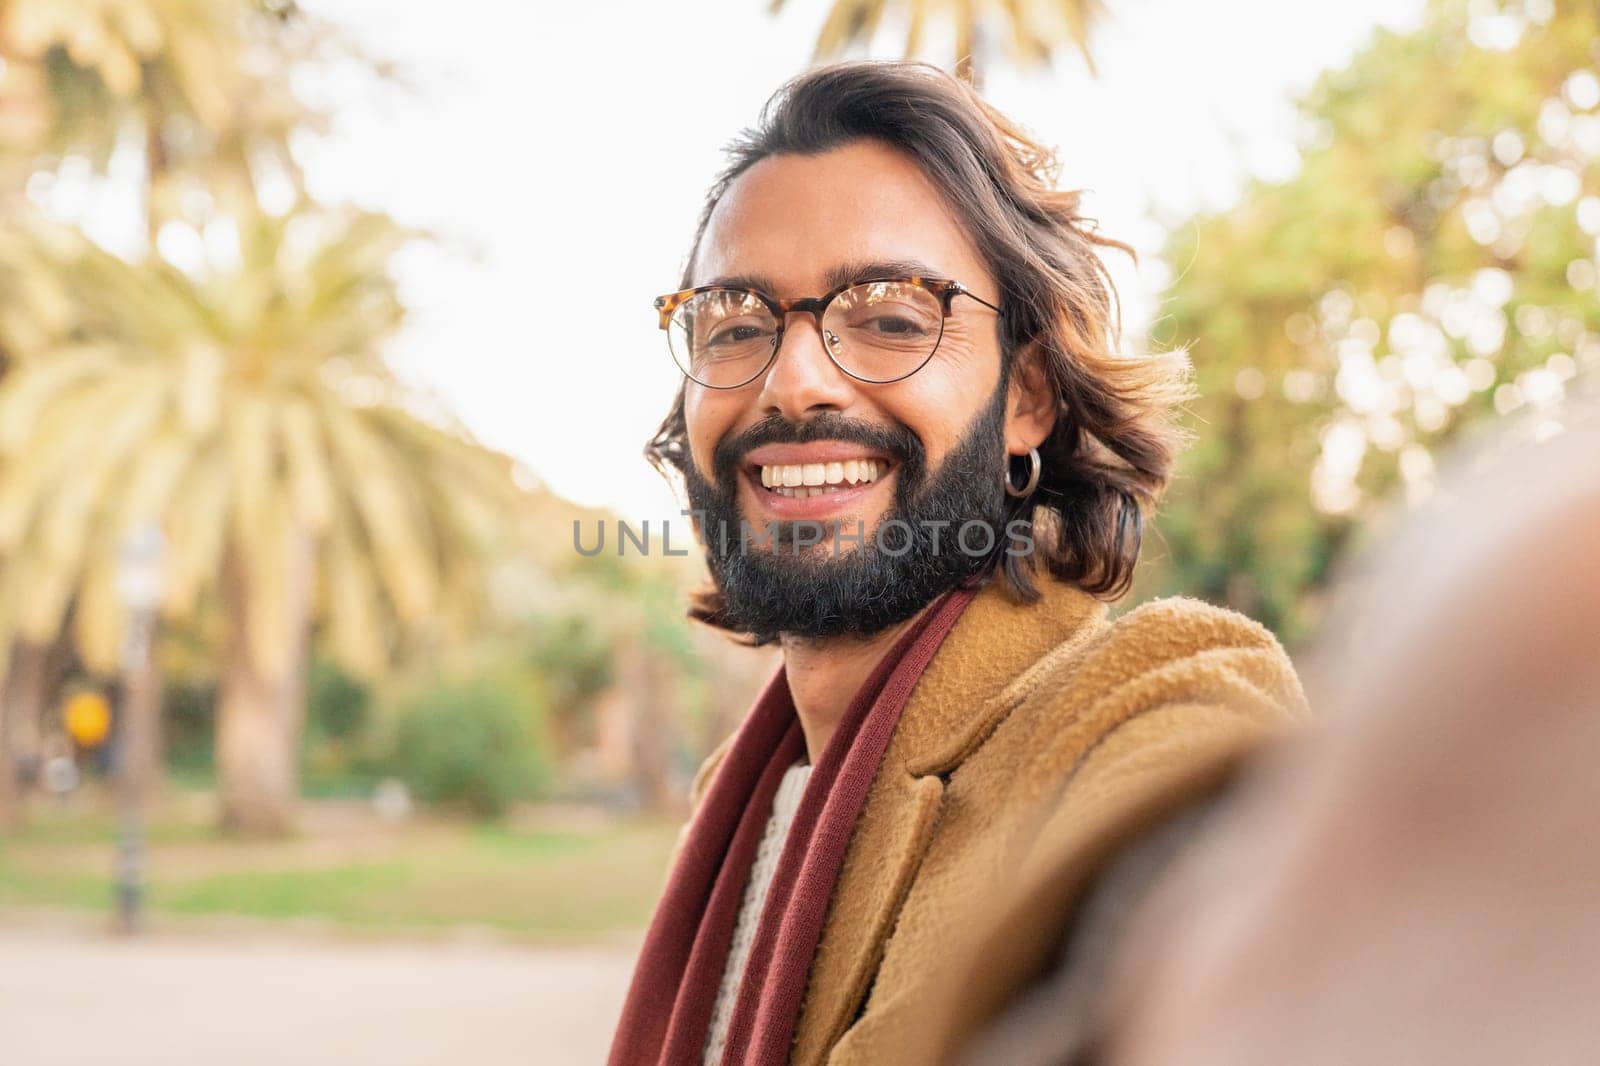 Attractive man with glasses and beard taking a selfie smiling outdoors in the park. by PaulCarr